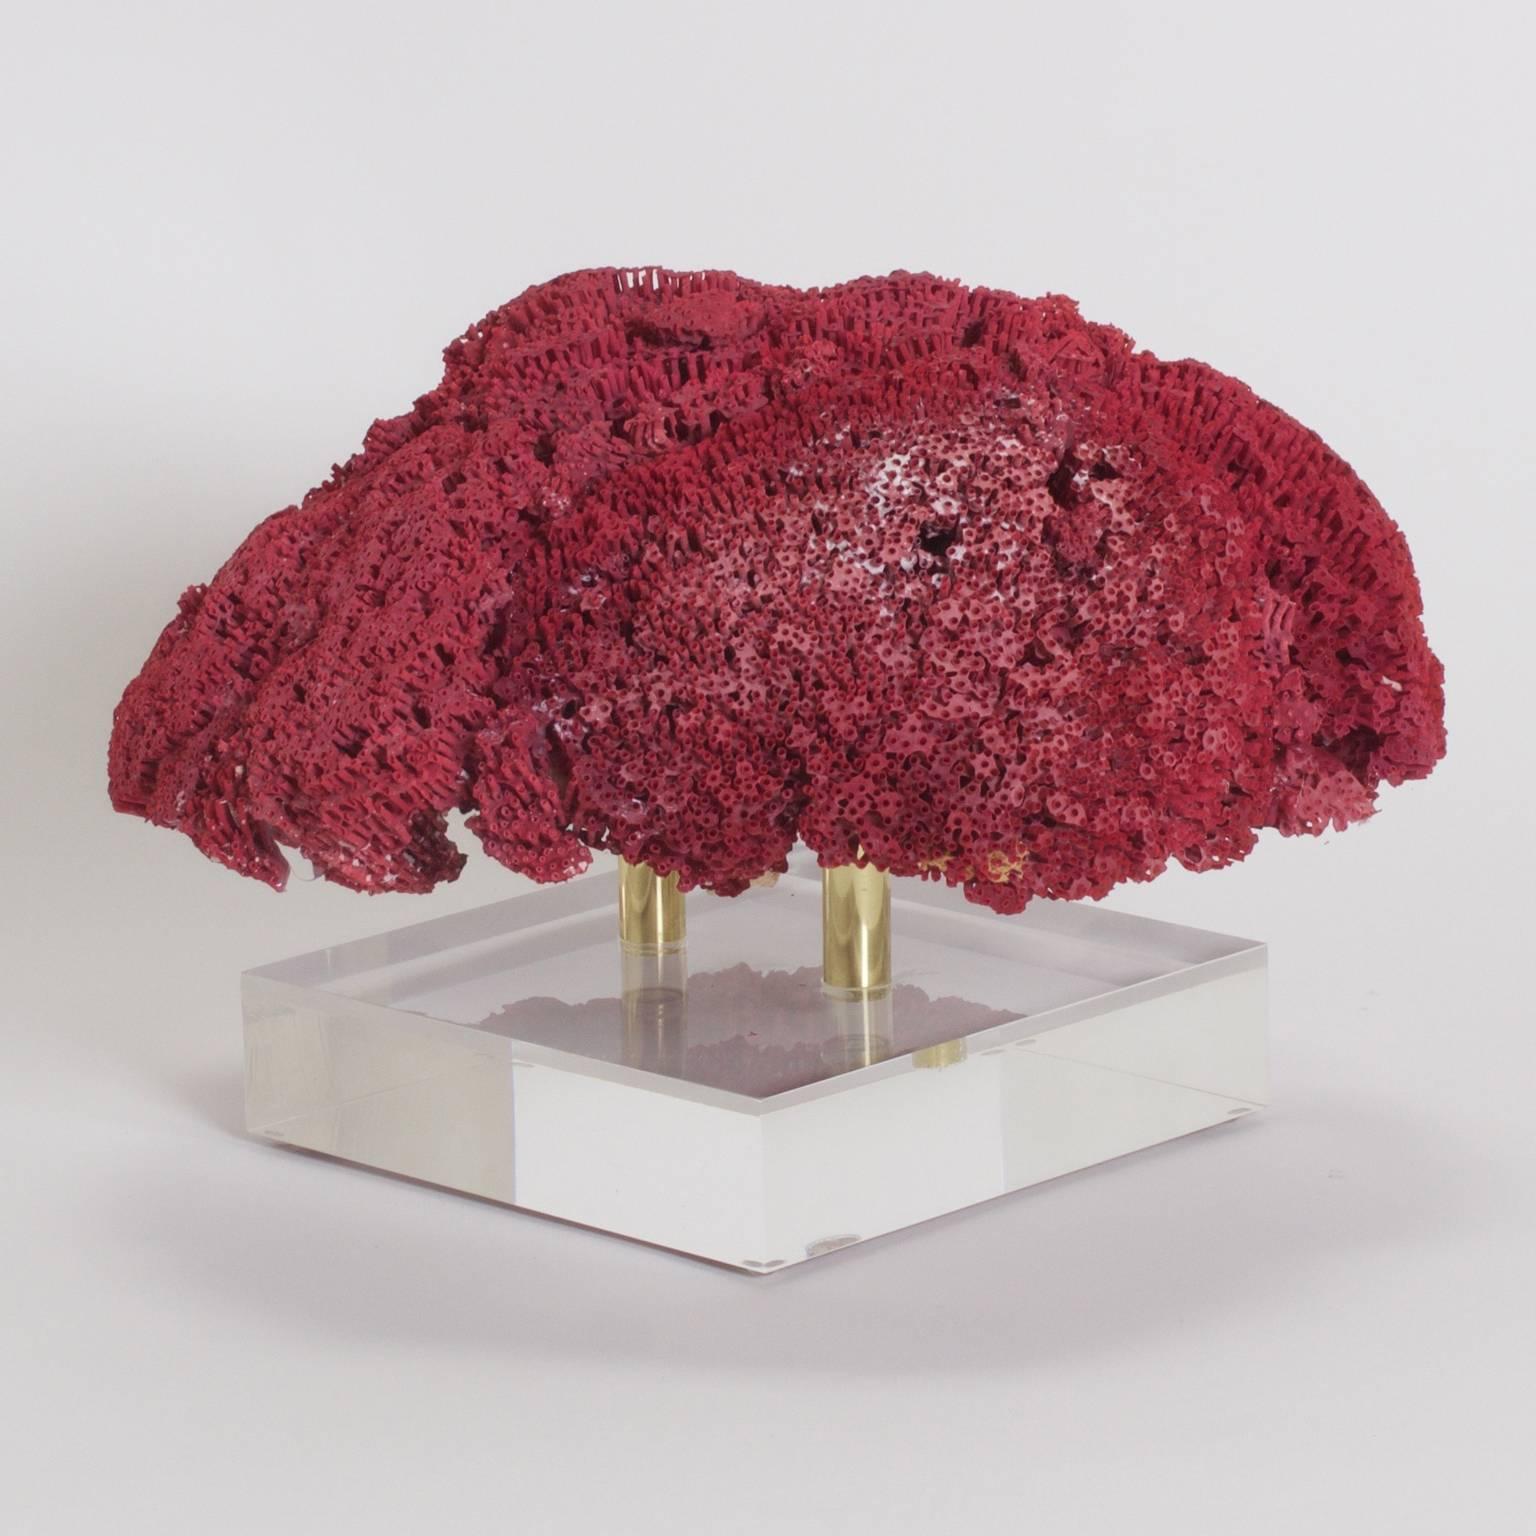 Contemplate this large red pipe organ coral specimen presented on a custom brass and Lucite stand. This awe inspiring piece is a celebration of science and art. This piece cannot be shipped out of the US, without expensive extra expenditures for